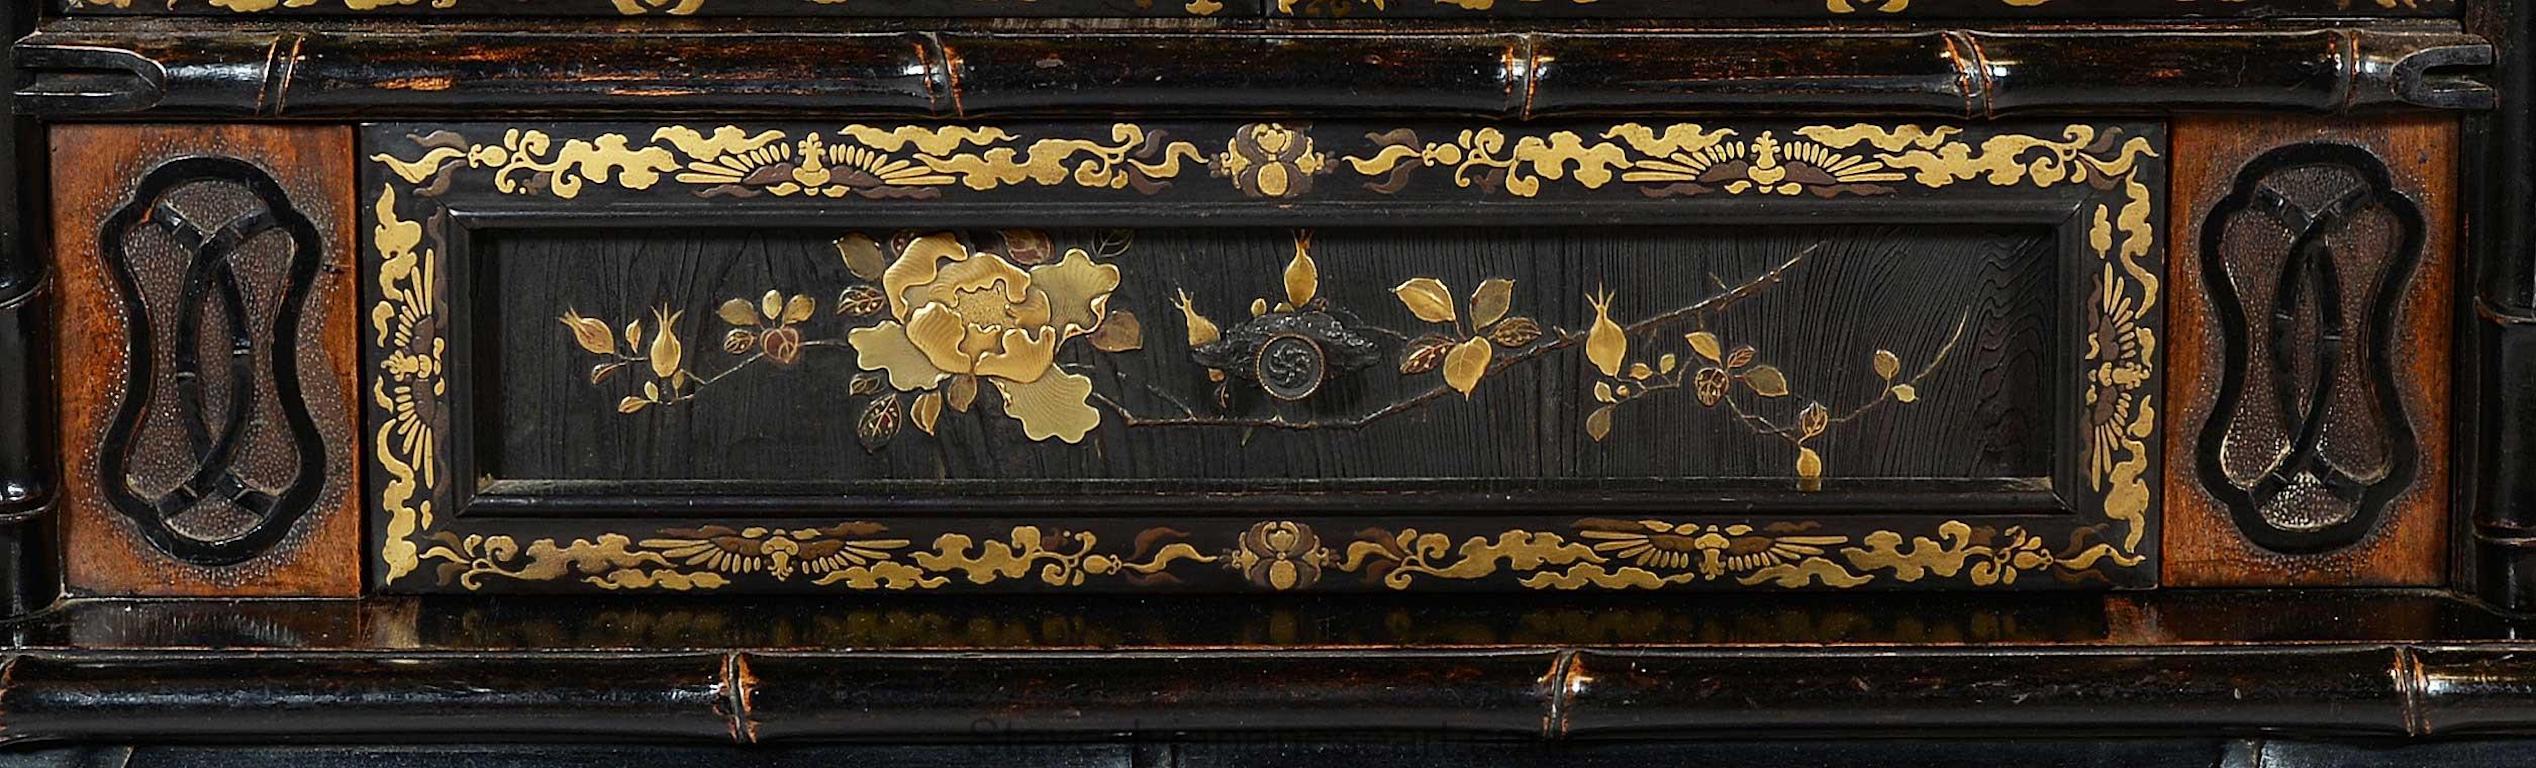 Delightful Japanese Bamboo Form Gold Lacquer Kazaridana Cabinet For Sale 9